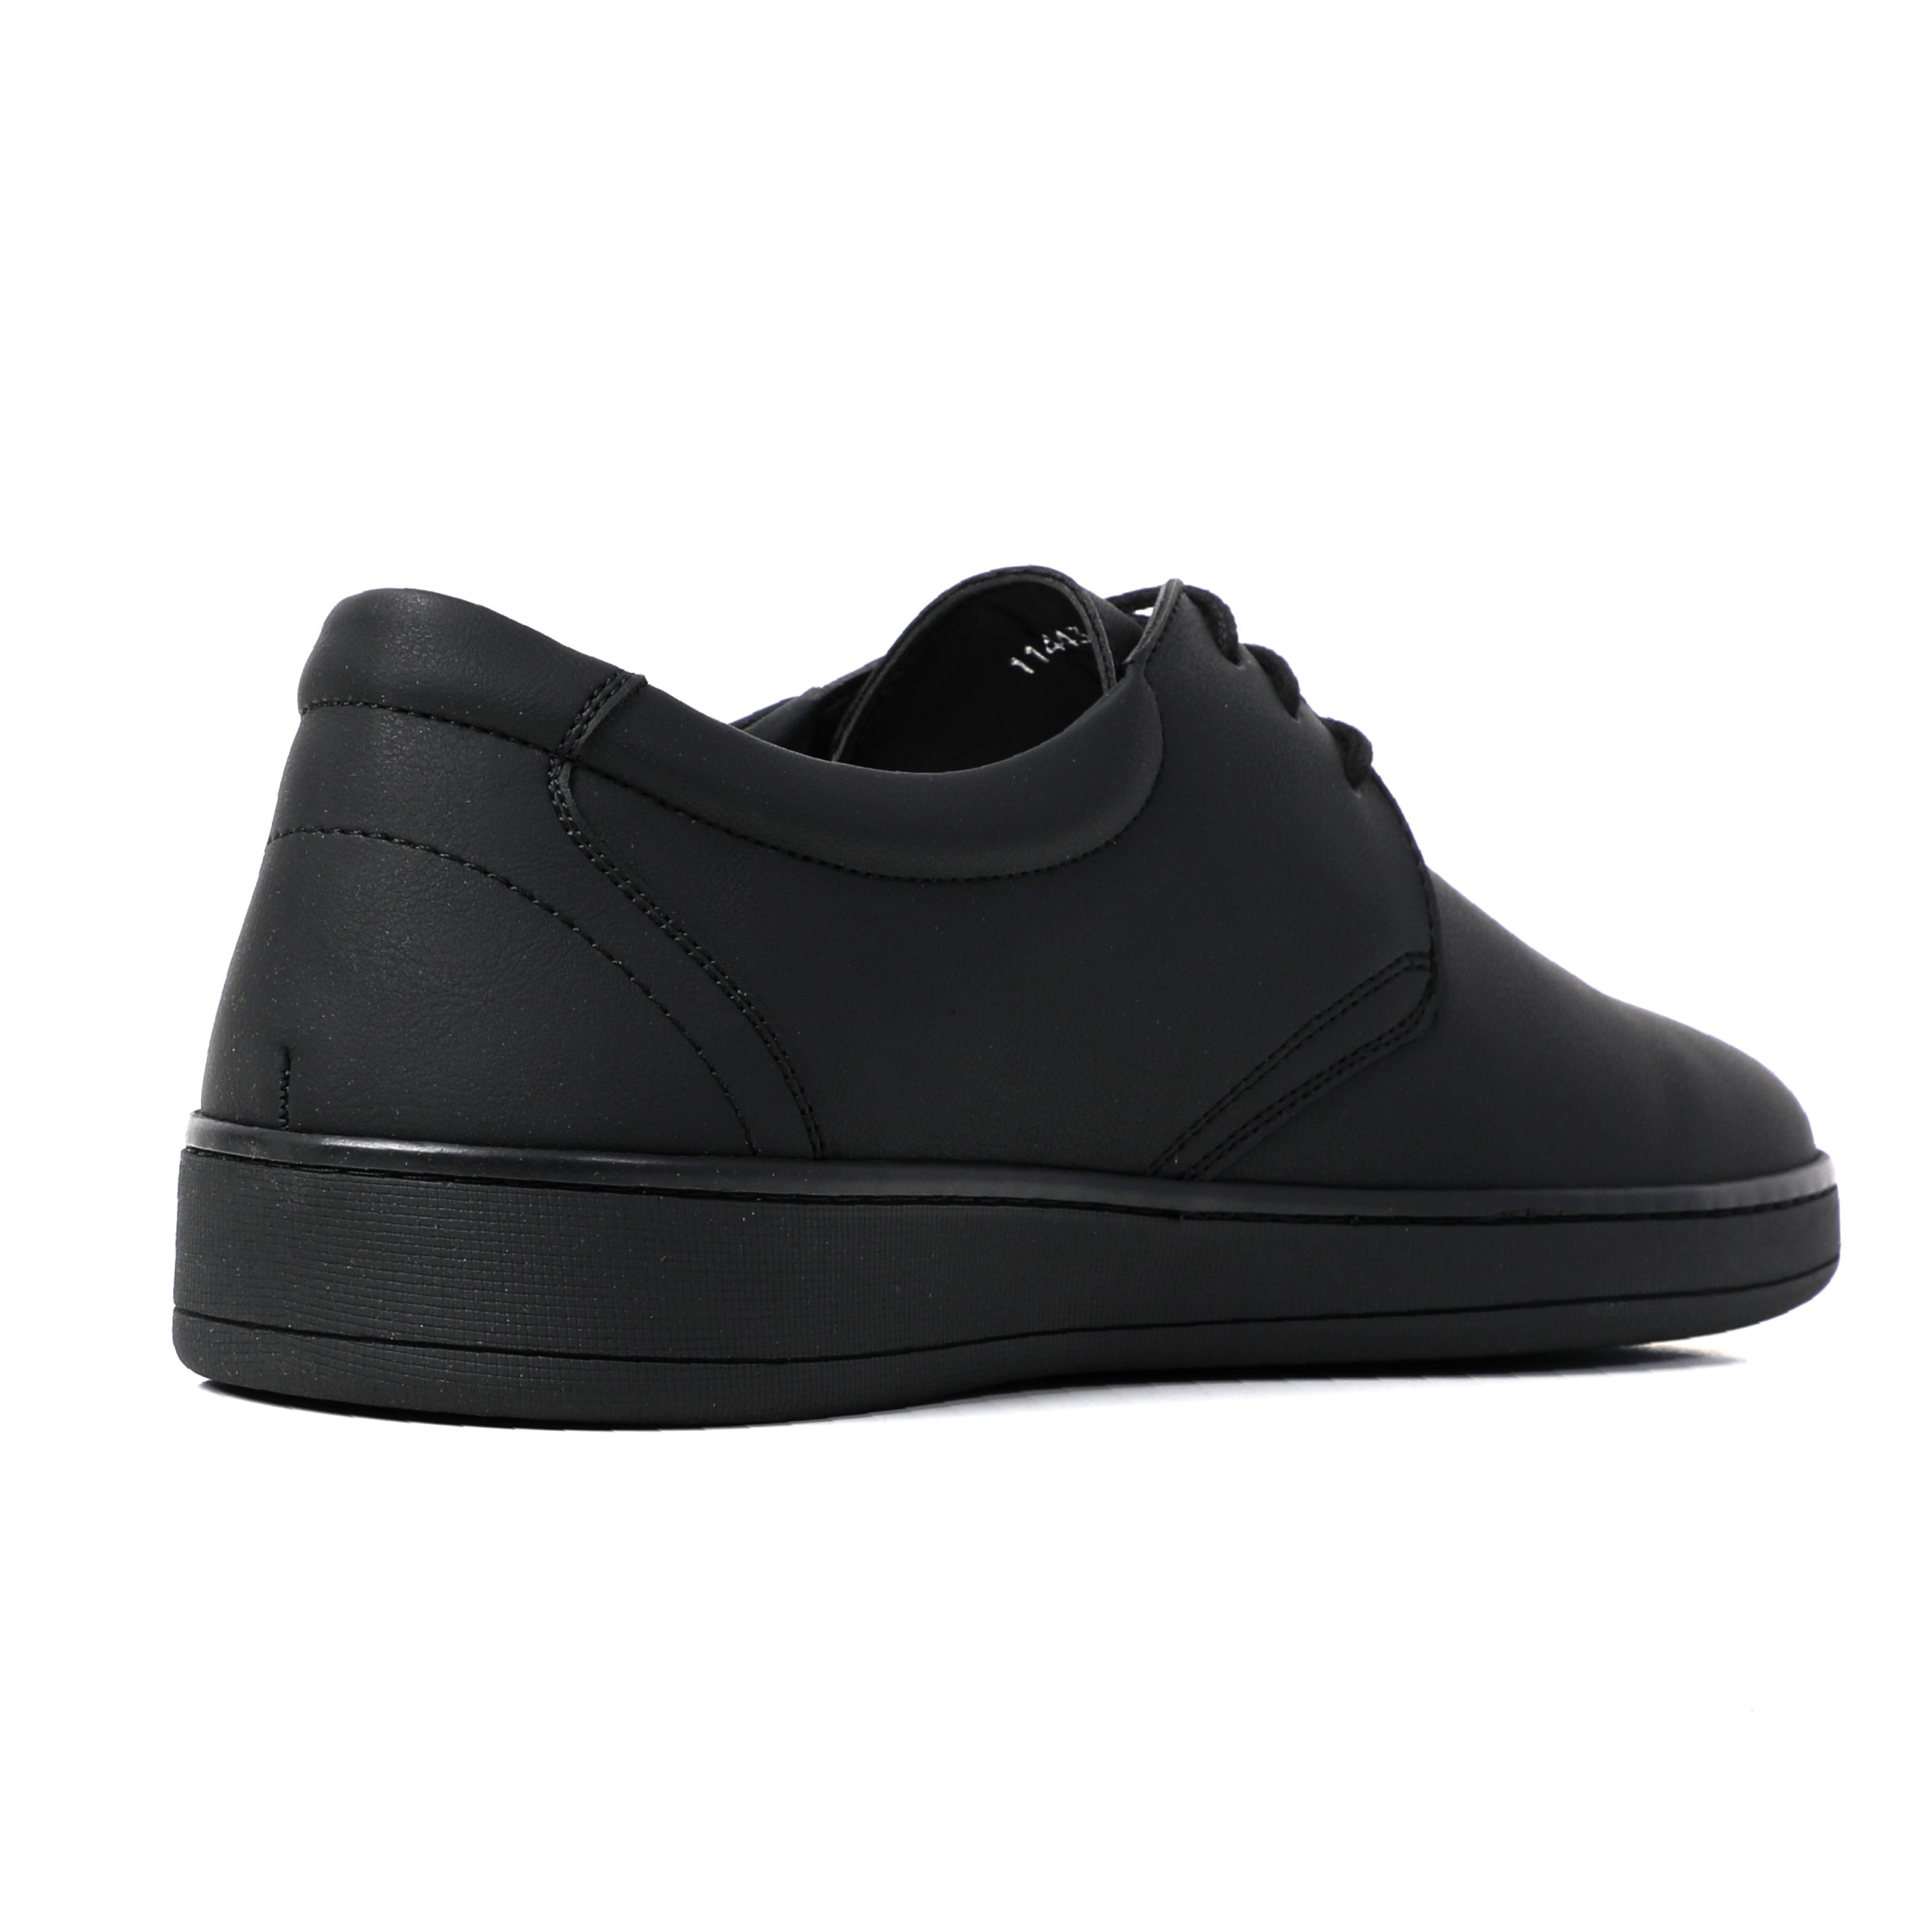 Men Casual Black Shoes With Lace-Tie Up